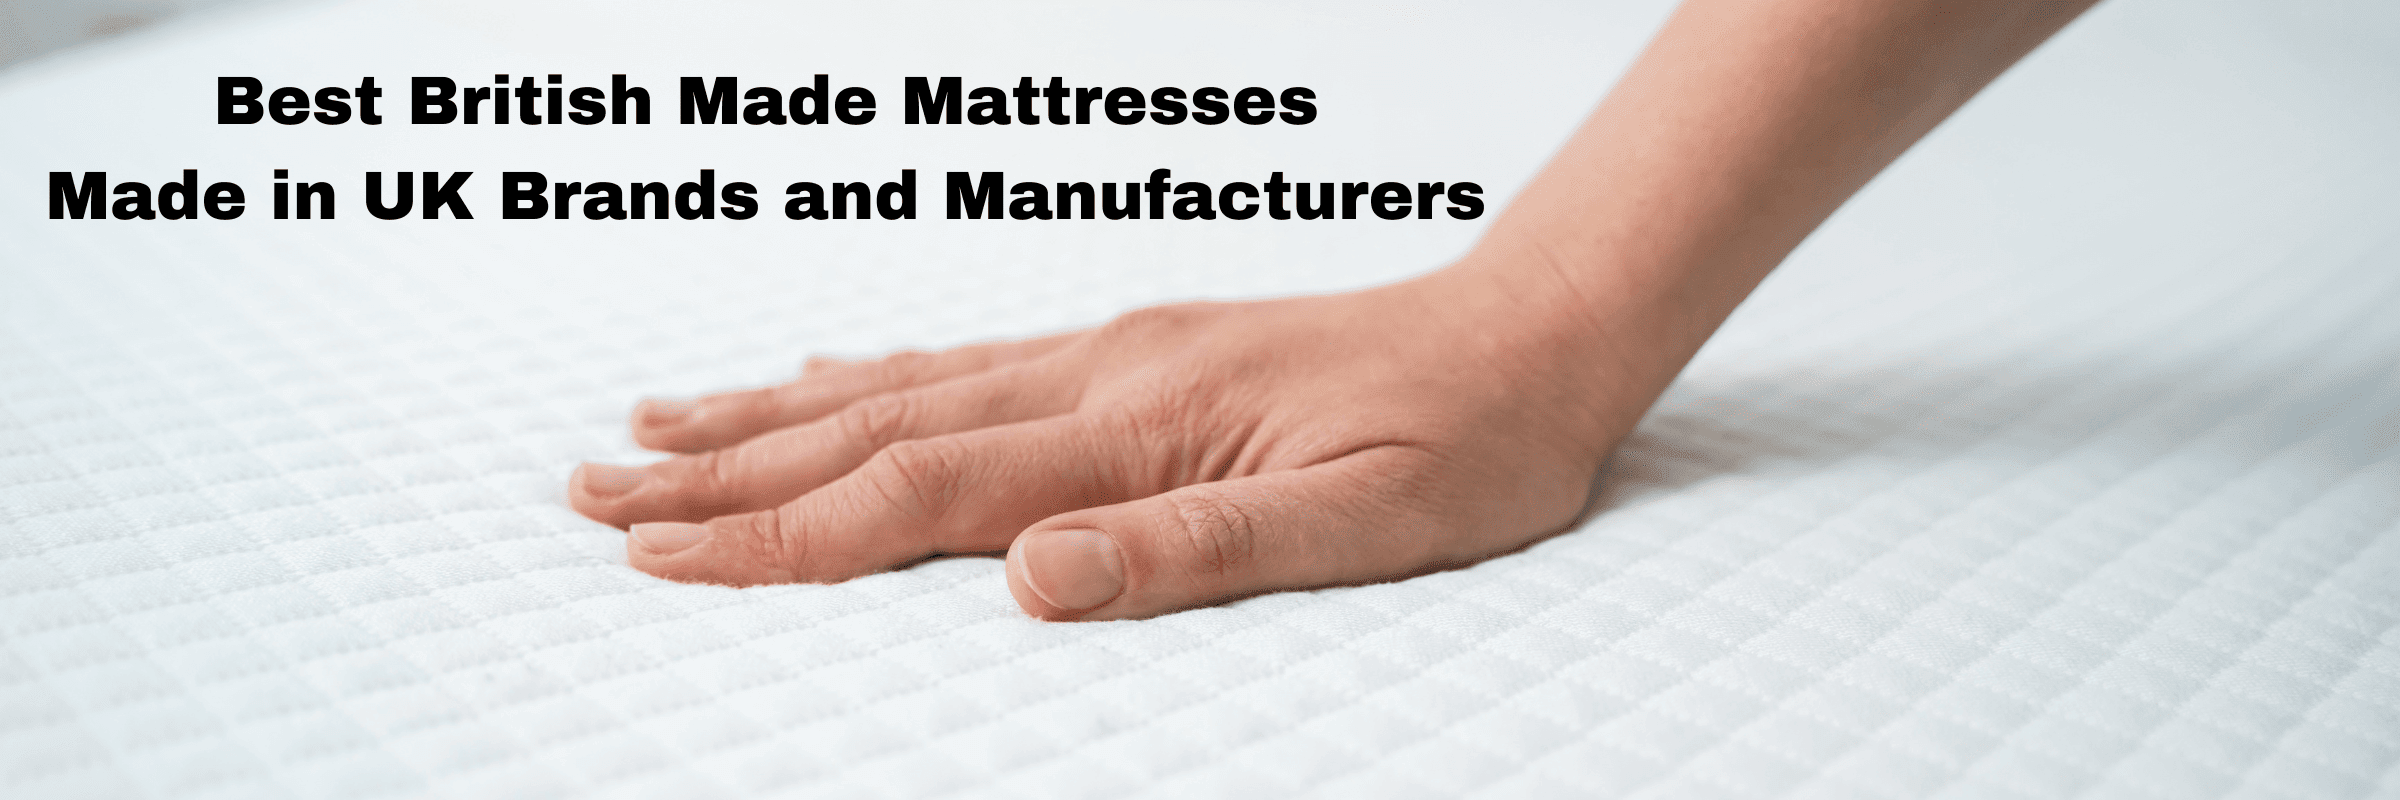 Best British Made Mattresses Made in UK Brands and Manufacturers (1)